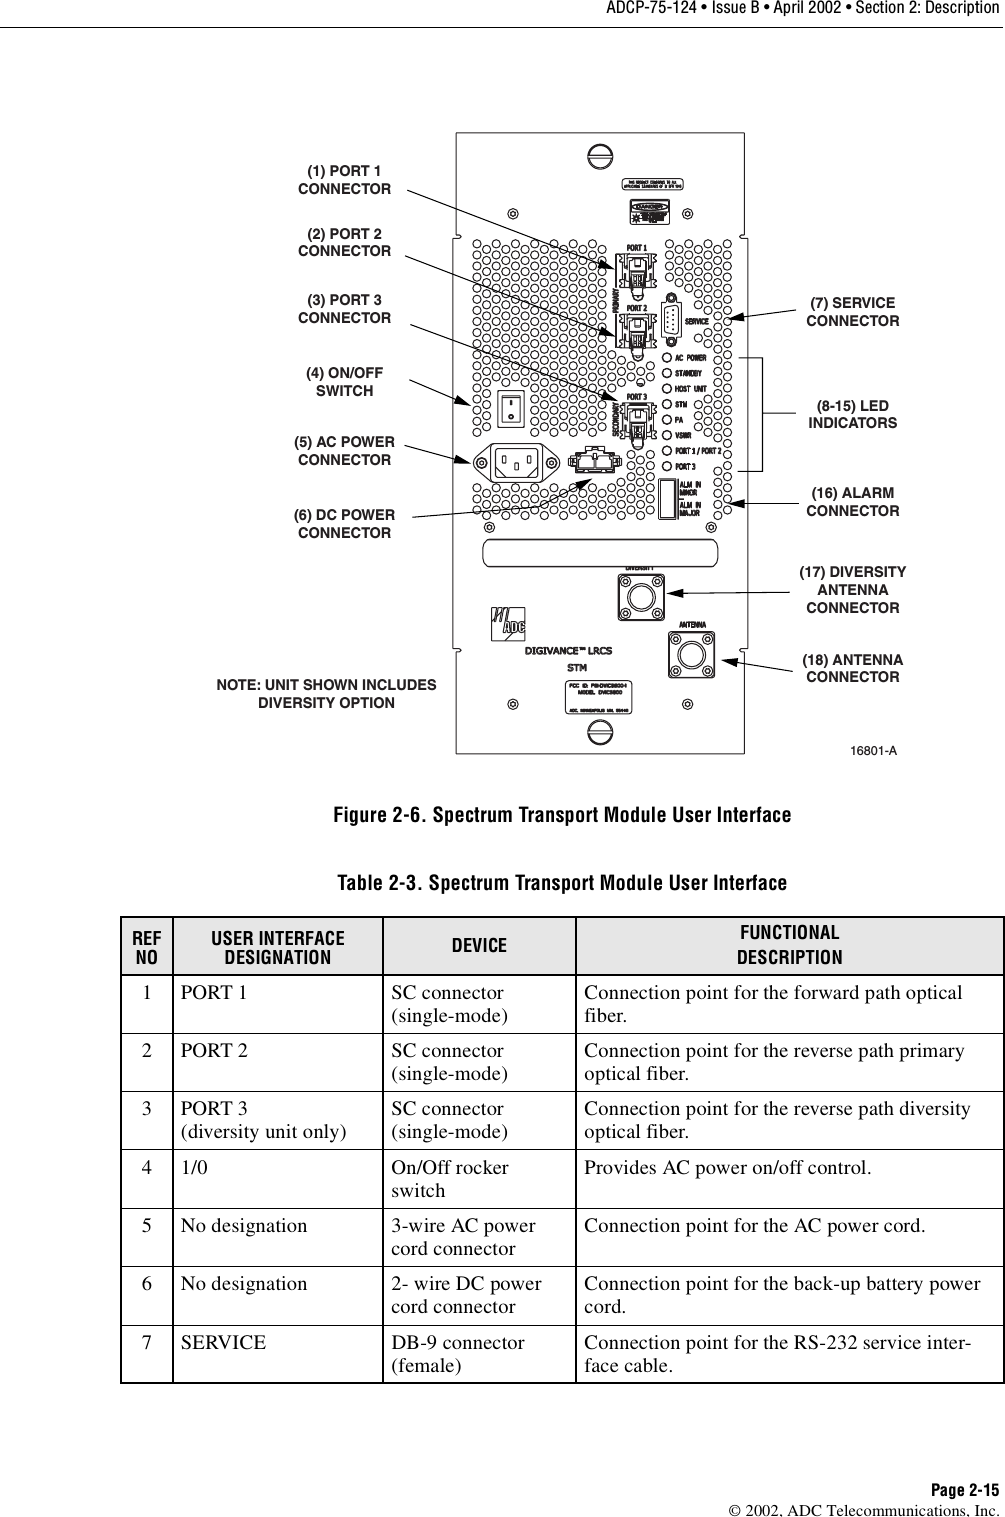 ADCP-75-124 • Issue B • April 2002 • Section 2: DescriptionPage 2-15©2002, ADC Telecommunications, Inc.Figure 2-6. Spectrum Transport Module User InterfaceTable 2-3. Spectrum Transport Module User InterfaceREF NOUSER INTERFACE DESIGNATION DEVICE FUNCTIONALDESCRIPTION1PORT1SCconnector(single-mode) Connection point for the forward path opticalfiber.2PORT2SCconnector(single-mode) Connection point for the reverse path primaryoptical fiber.3PORT3(diversity unit only) SC connector(single-mode) Connection point for the reverse path diversityoptical fiber.41/0 On/Offrockerswitch Provides AC power on/off control.5Nodesignation 3-wire AC powercord connector Connection point for the AC power cord.6Nodesignation 2- wire DC powercord connector Connection point for the back-up battery powercord.7 SERVICE DB-9 connector(female) Connection point for the RS-232 service inter-face cable.16801-A(4) ON/OFFSWITCH(5) AC POWERCONNECTOR(6) DC POWERCONNECTOR(1) PORT 1CONNECTOR(2) PORT 2CONNECTOR(3) PORT 3CONNECTOR(7) SERVICECONNECTOR(8-15) LEDINDICATORS(16) ALARMCONNECTOR(17) DIVERSITYANTENNACONNECTOR(18) ANTENNACONNECTORNOTE: UNIT SHOWN INCLUDESDIVERSITY OPTION